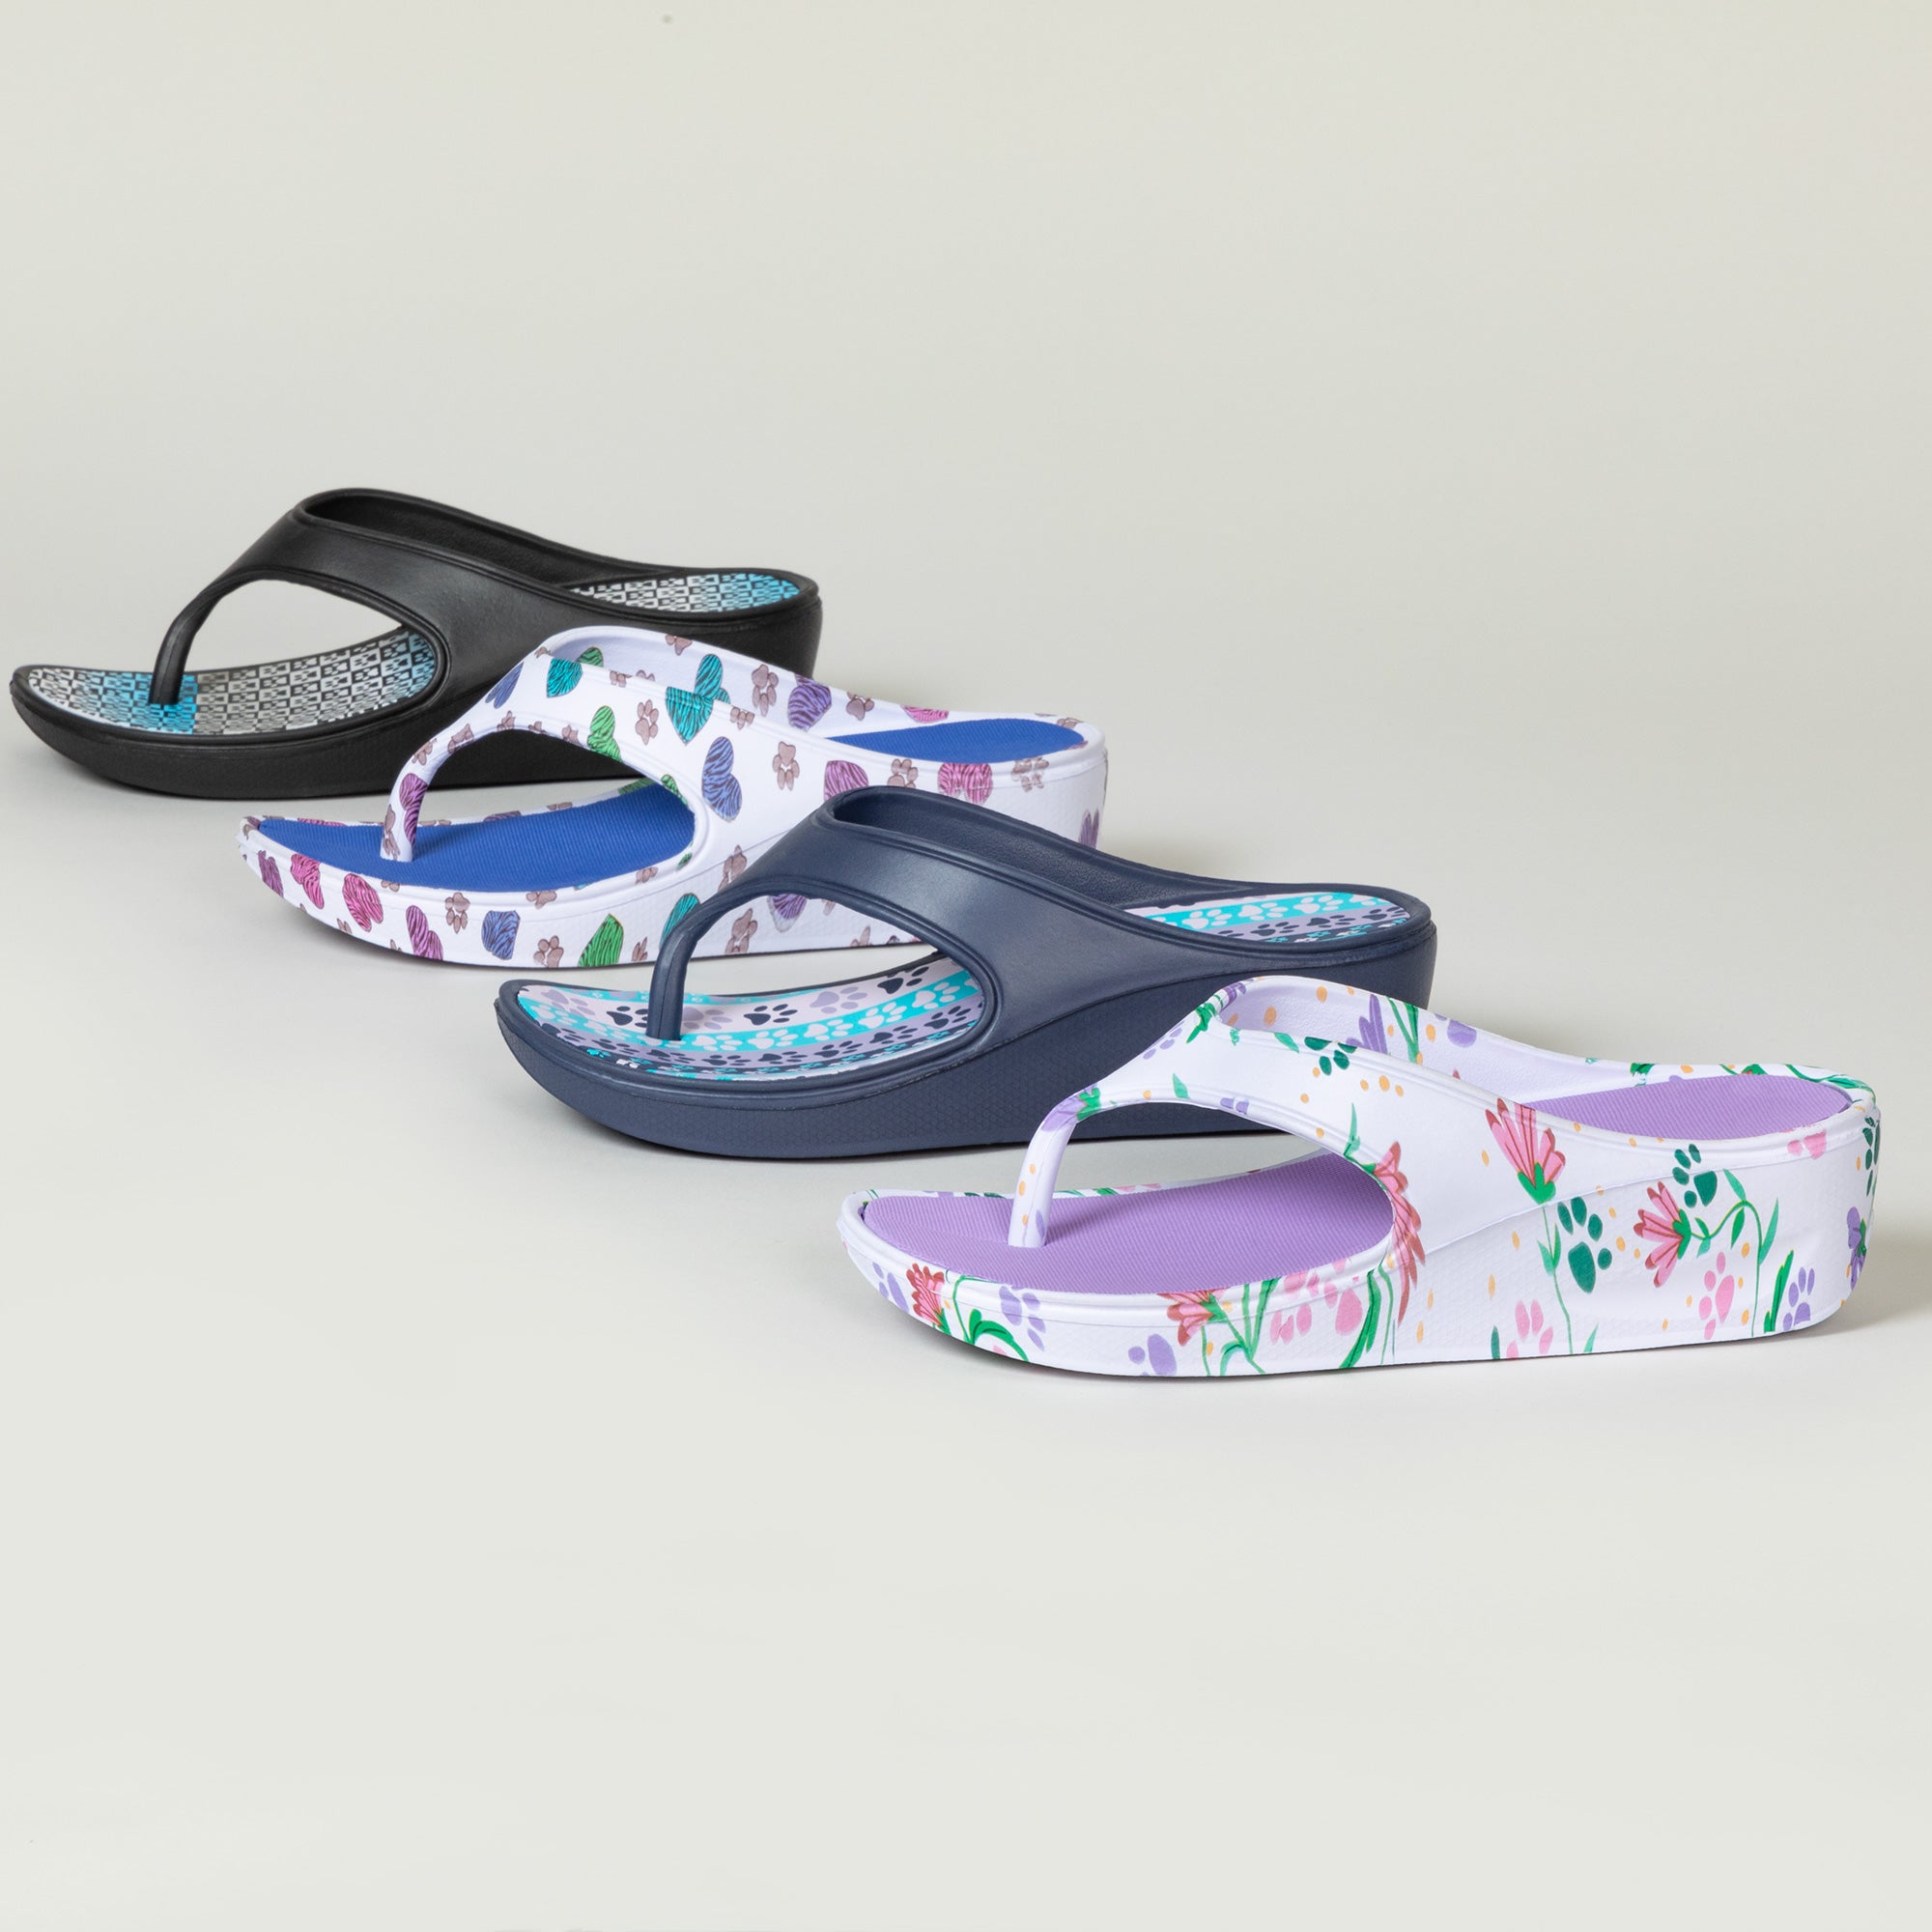 Paw Print Wedge Flip Flops - Paws In The Garden - 9